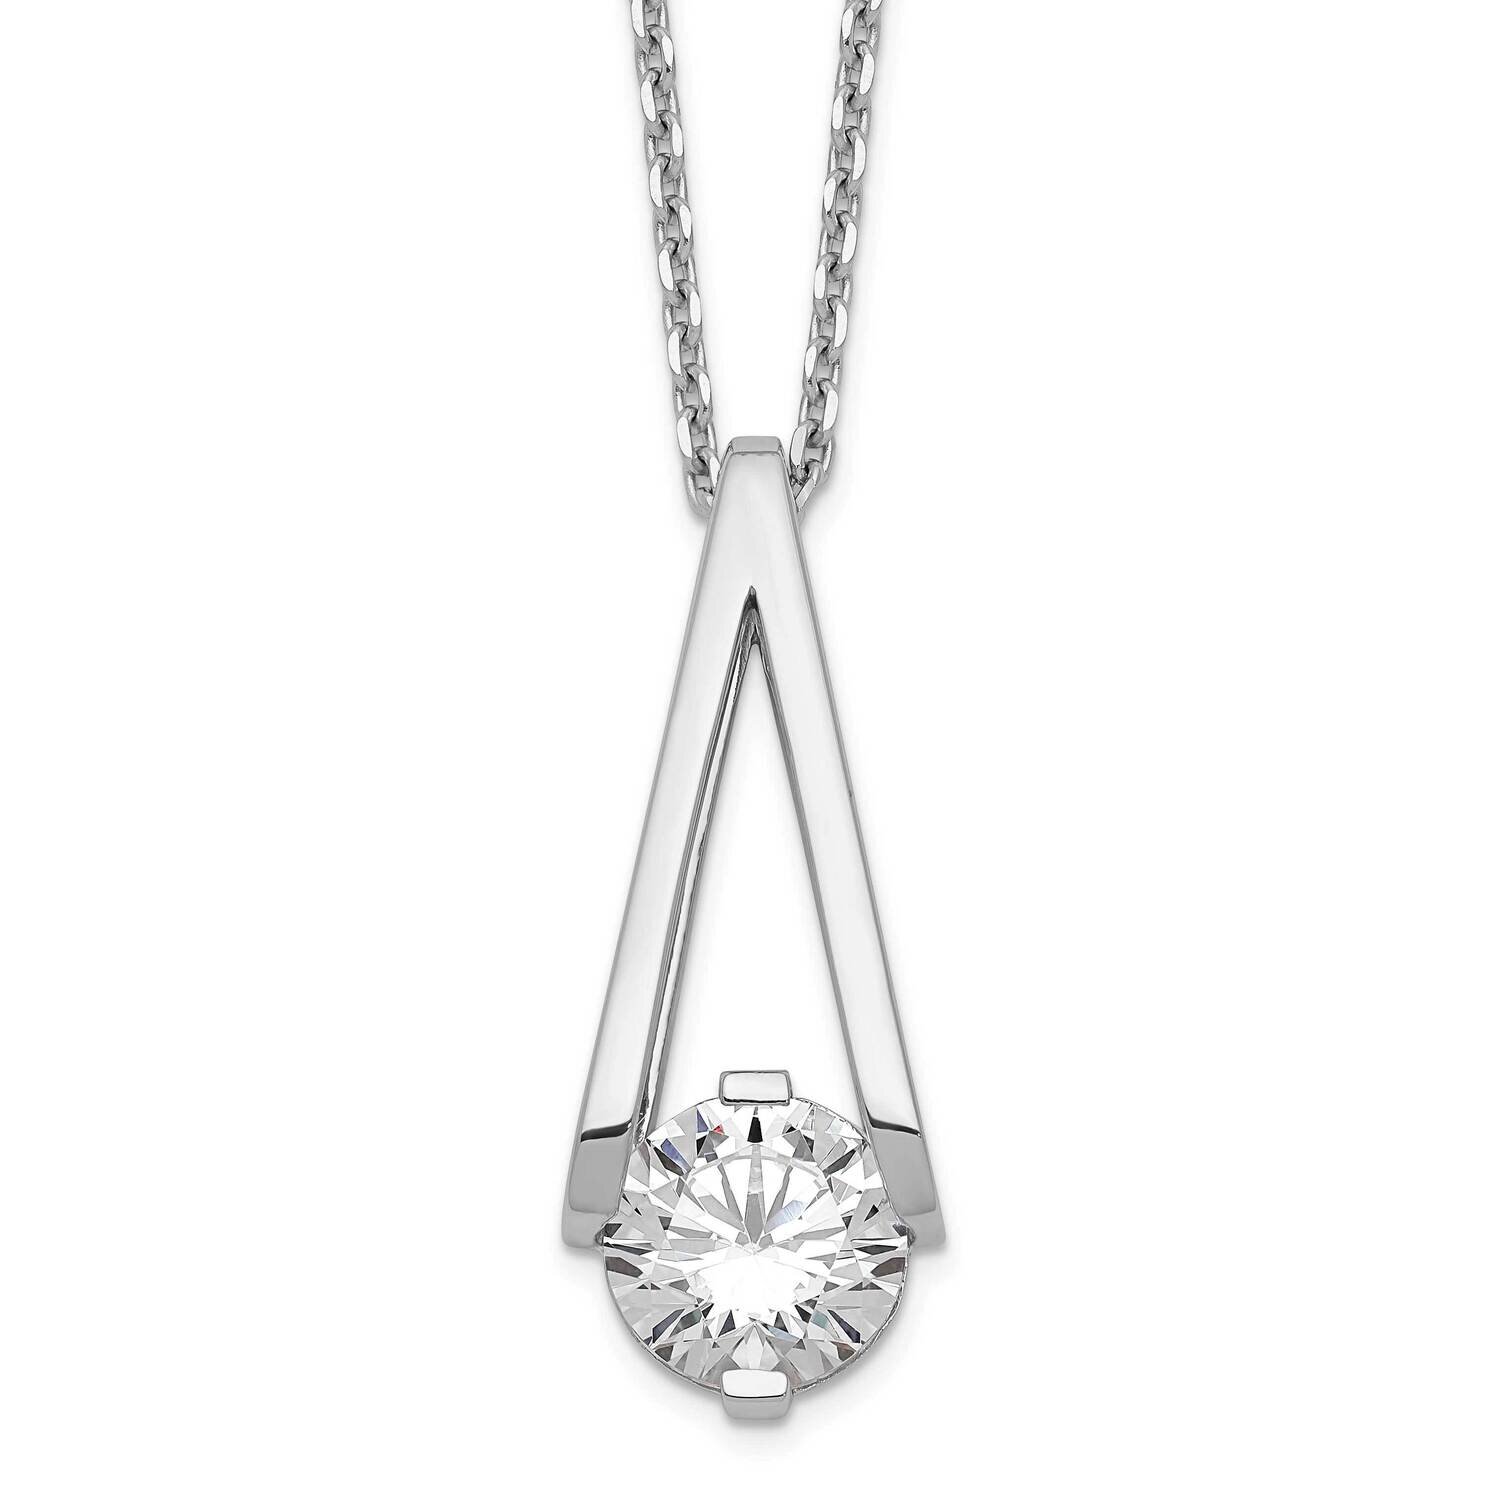 Cheryl M Rhodium-Plated CZ Diamond Fancy V with 2 Inch Ext. Necklace Sterling Silver QCM1551-16